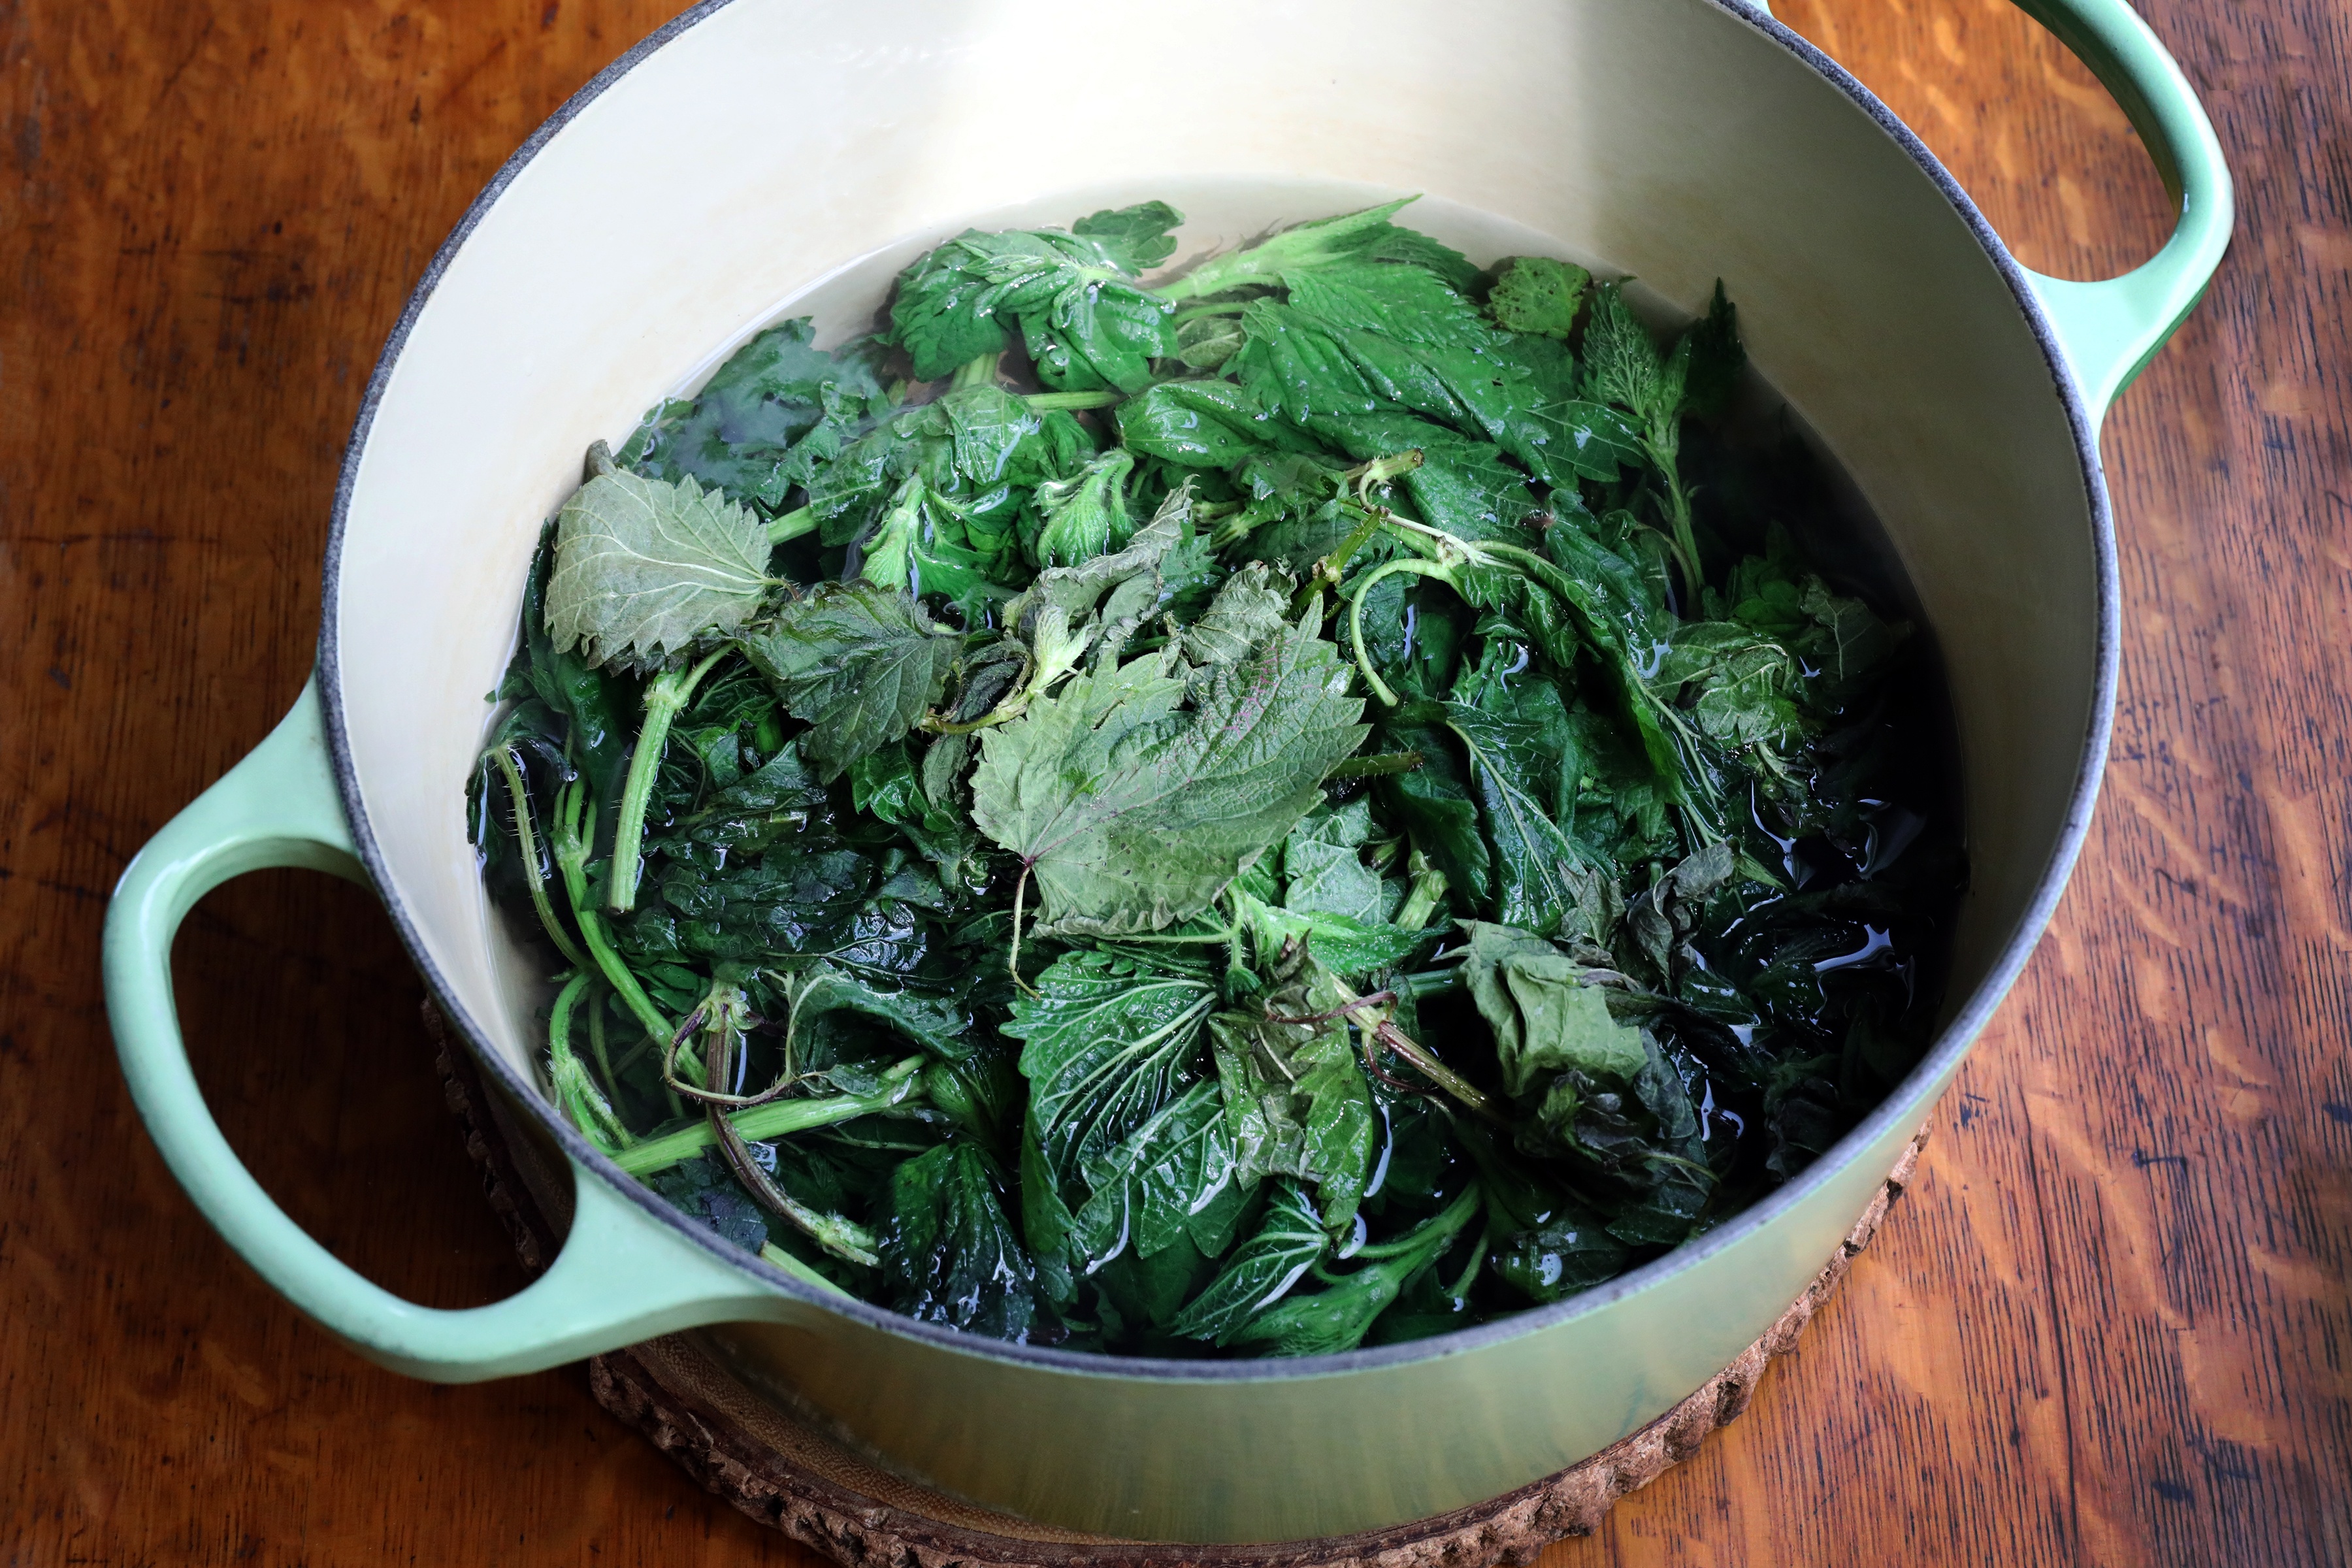 Pot soaking nettle leaf in hot water to blanch them